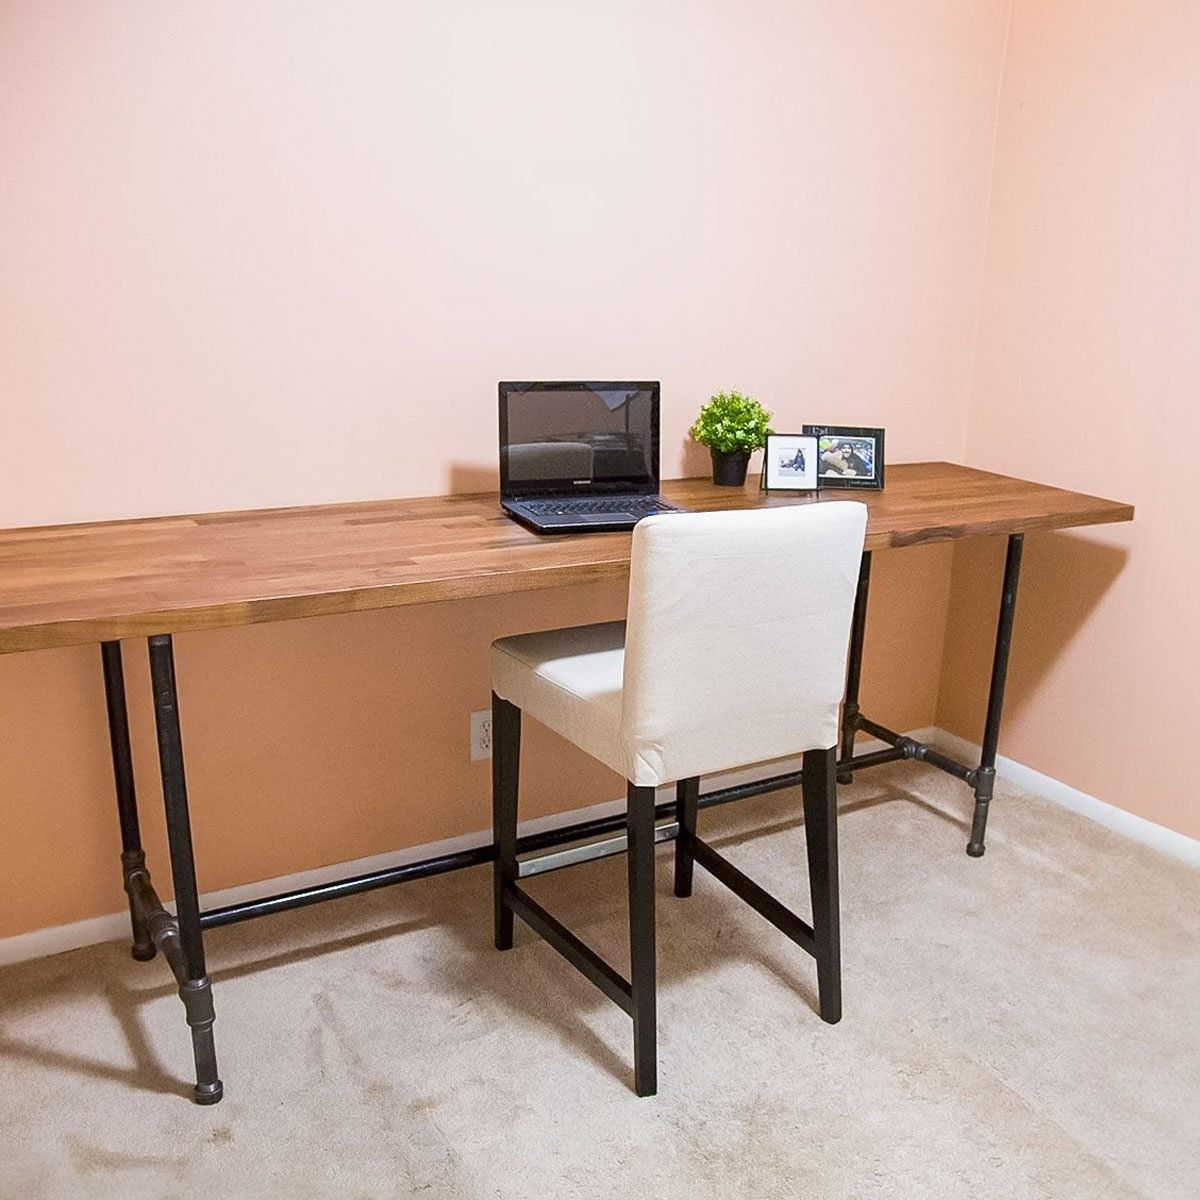 How To Build a Desk with Butcher Block and Pipes